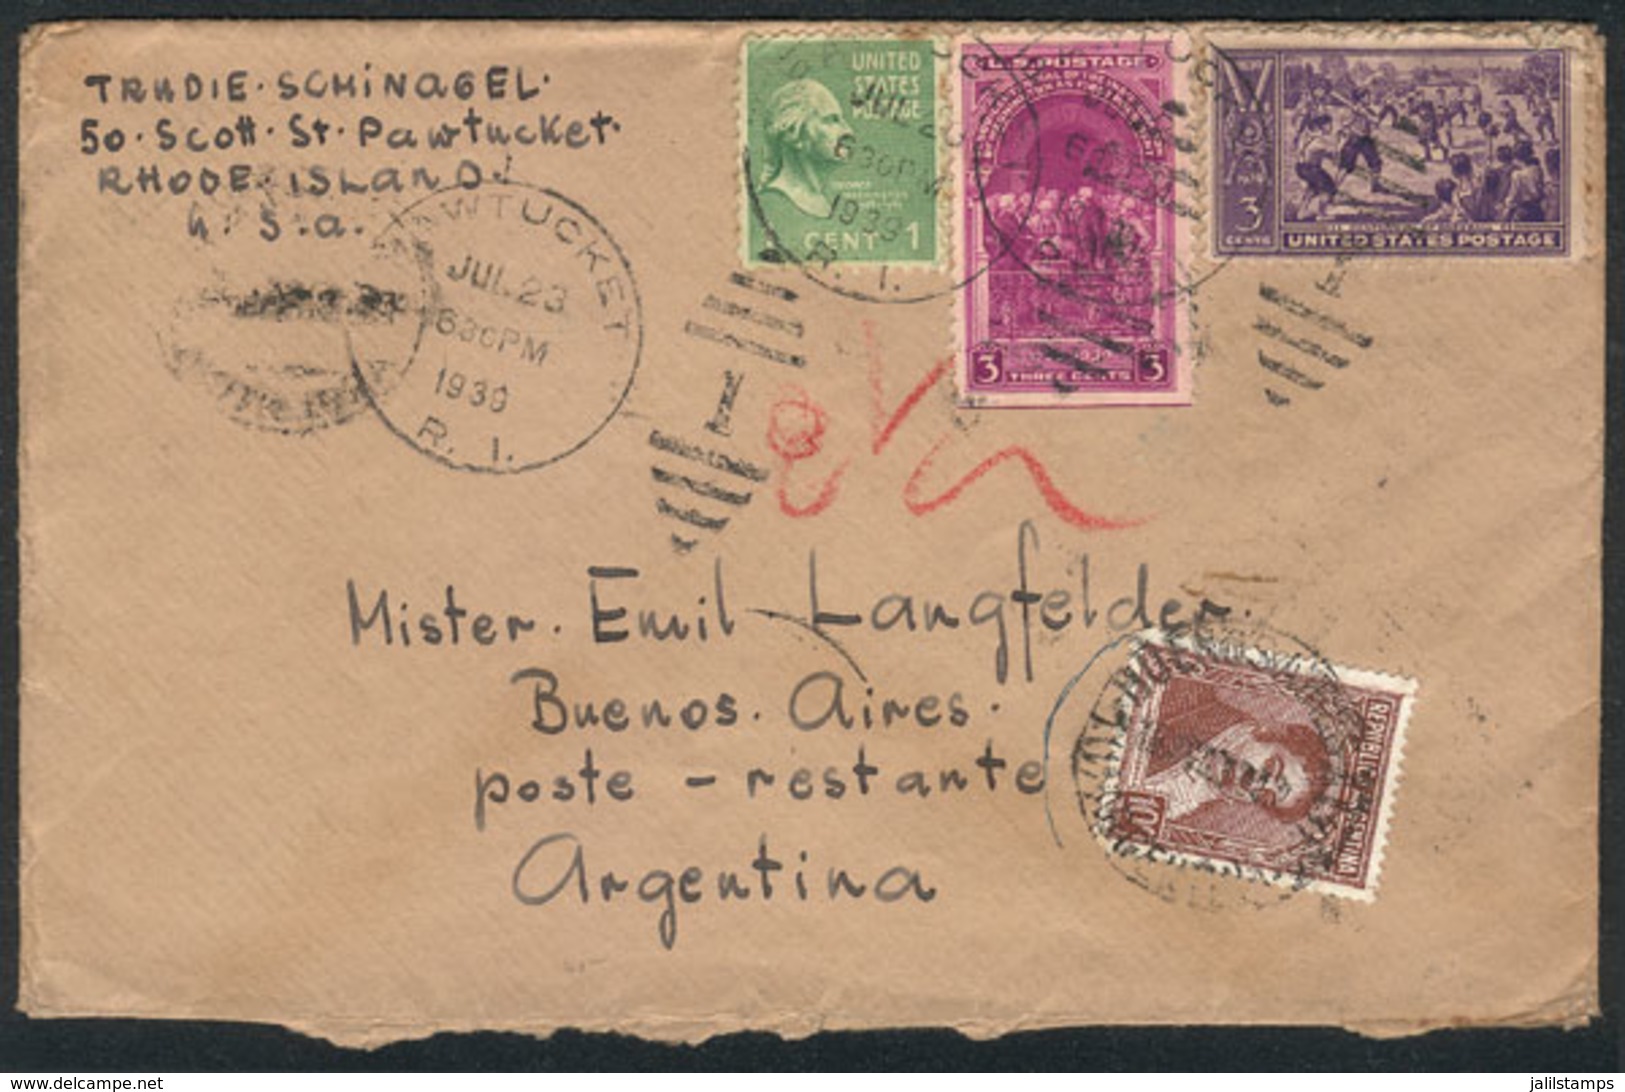 UNITED STATES: Cover Sent From Rhode Island To Poste Restante (Buenos Aires) On 20/JUL/1939, With Argentina Stamp Of 10c - Postal History